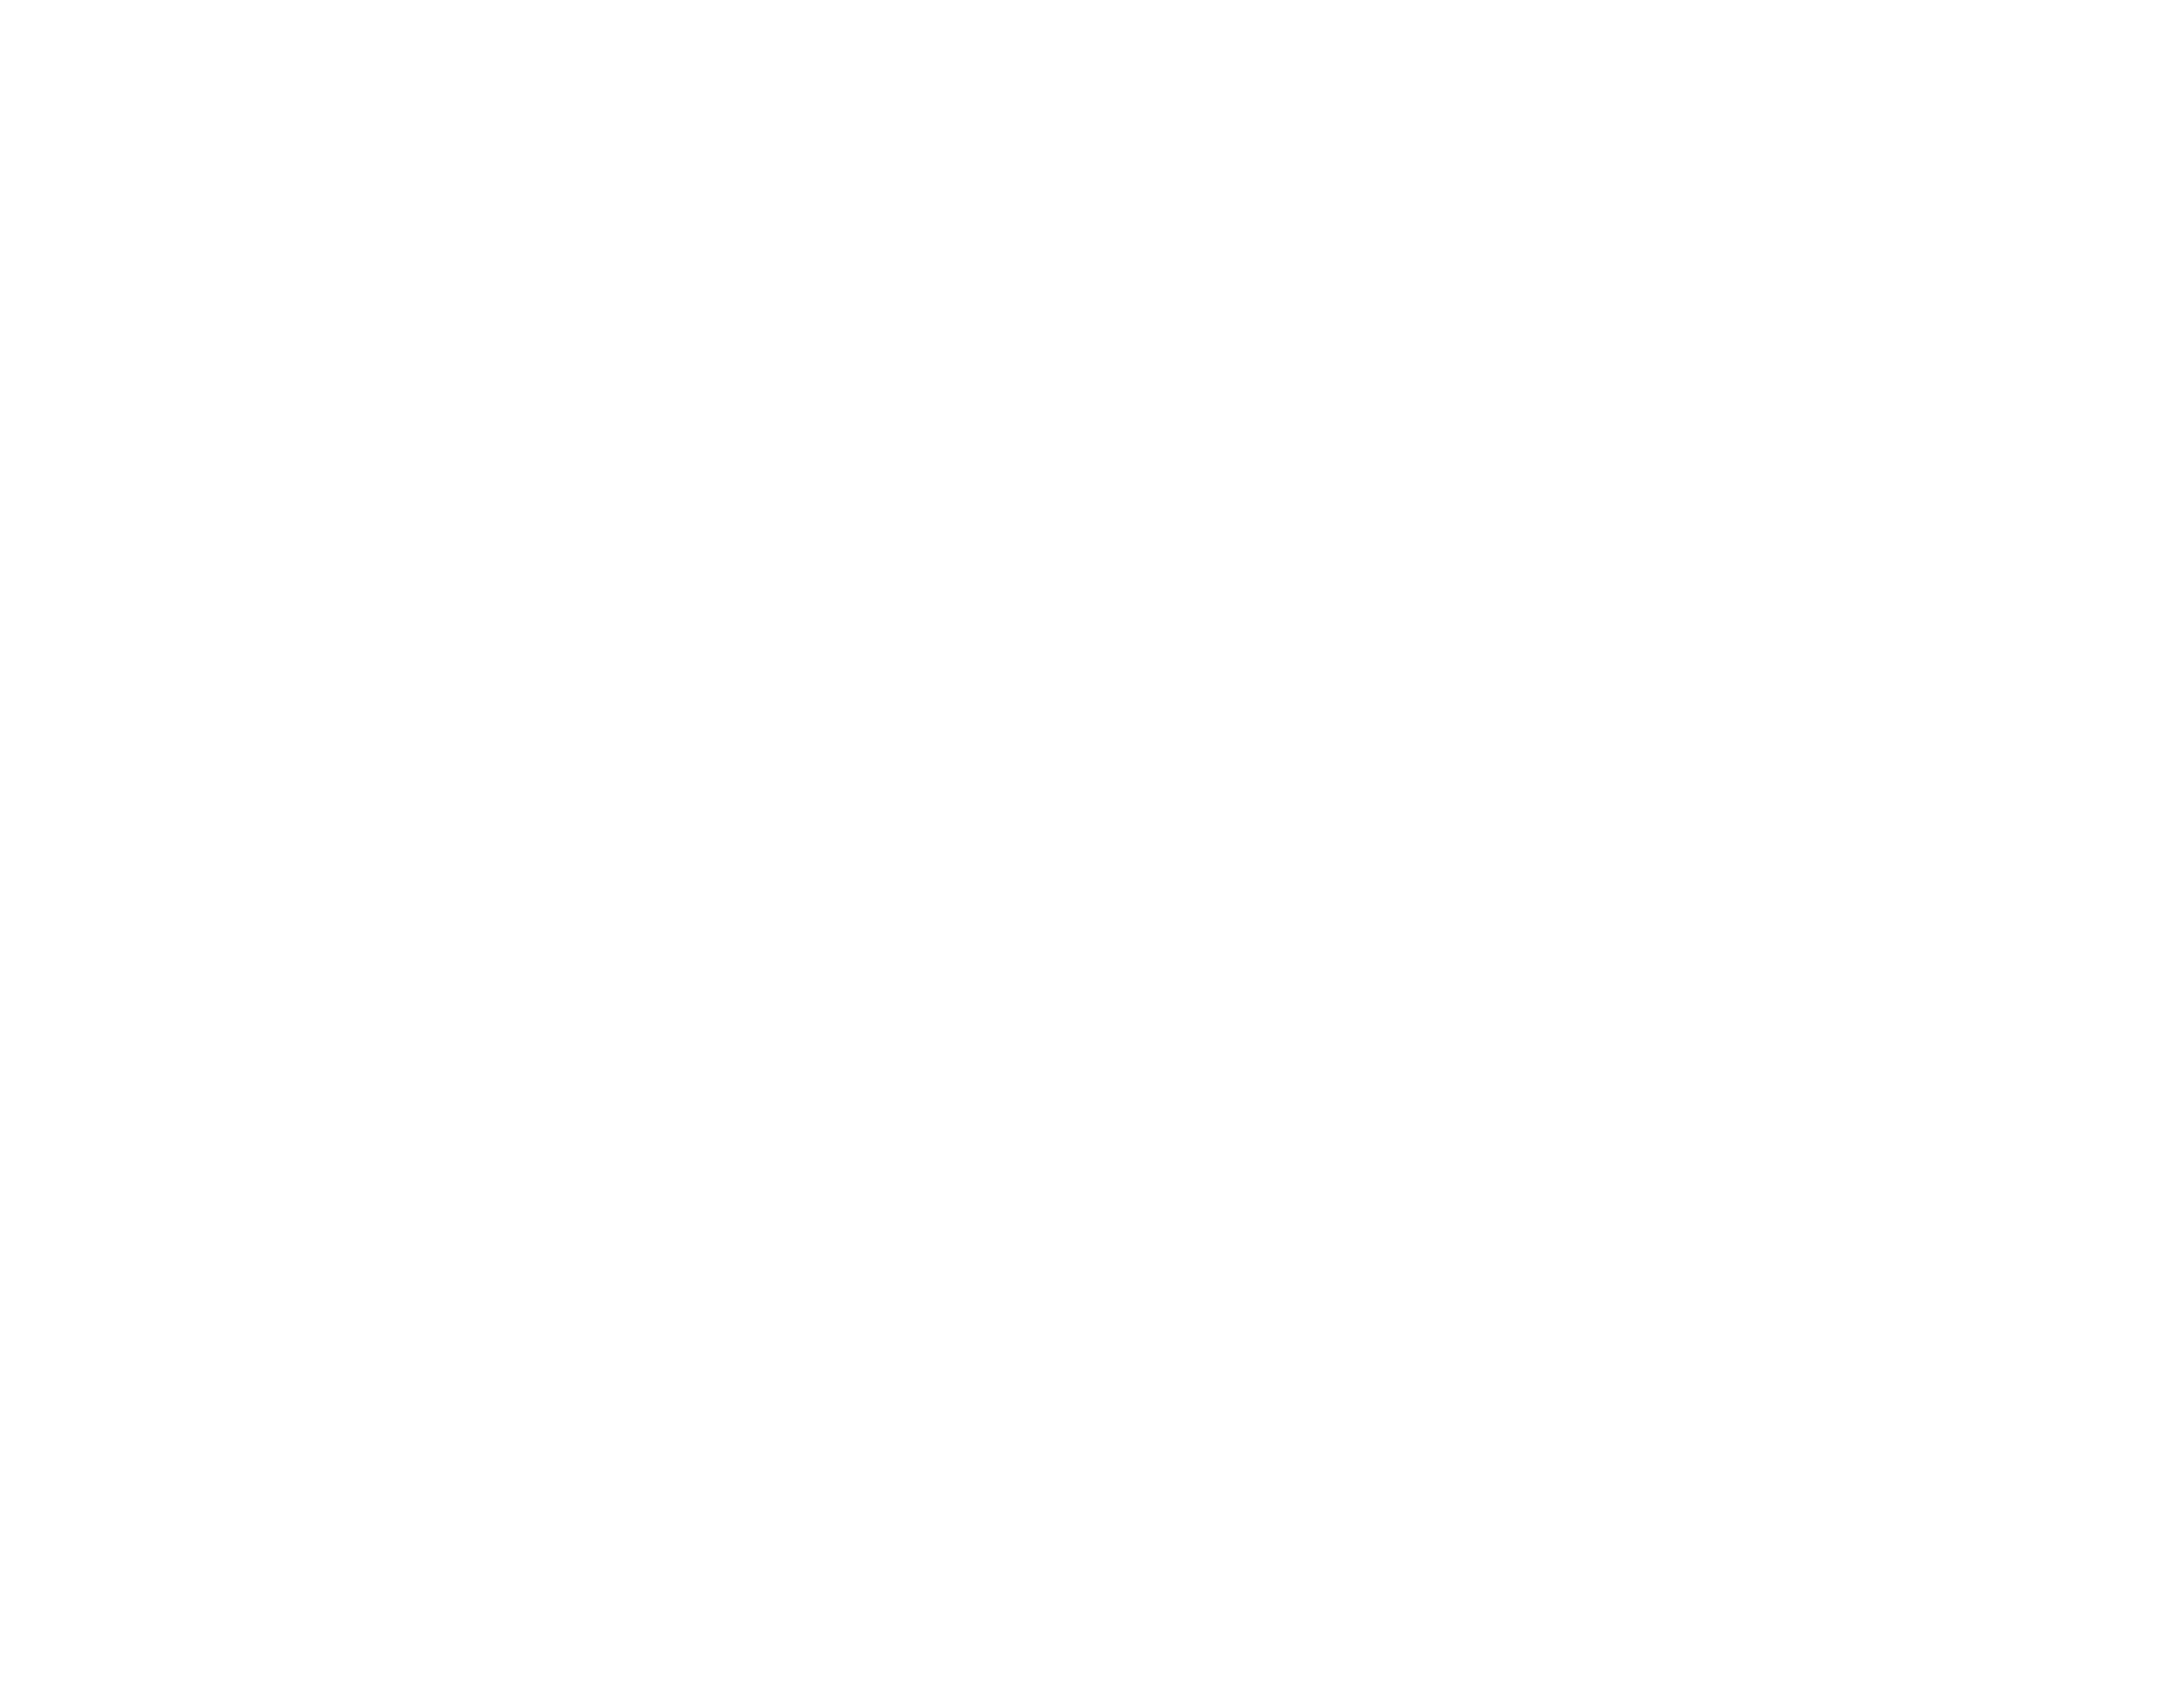 WSWF--White--transparent-background.png